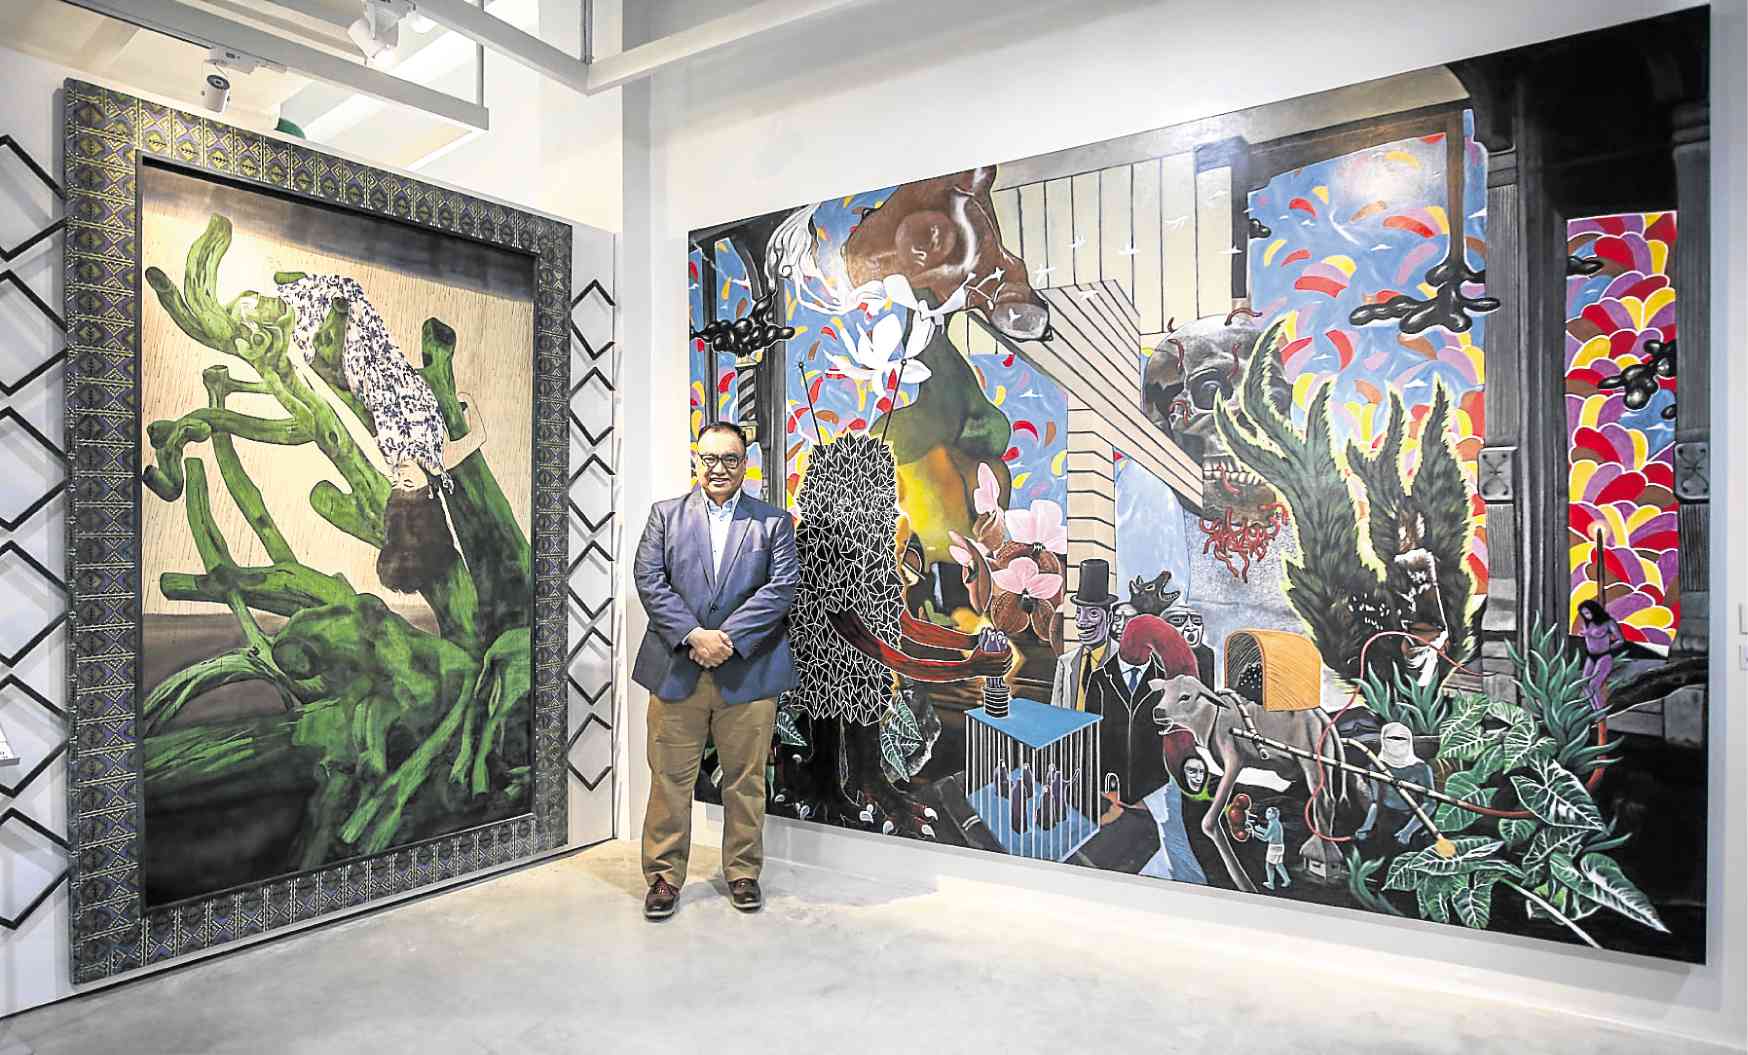 How a NY banker’s collection ended up at the Iloilo Museum of Contemporary Art